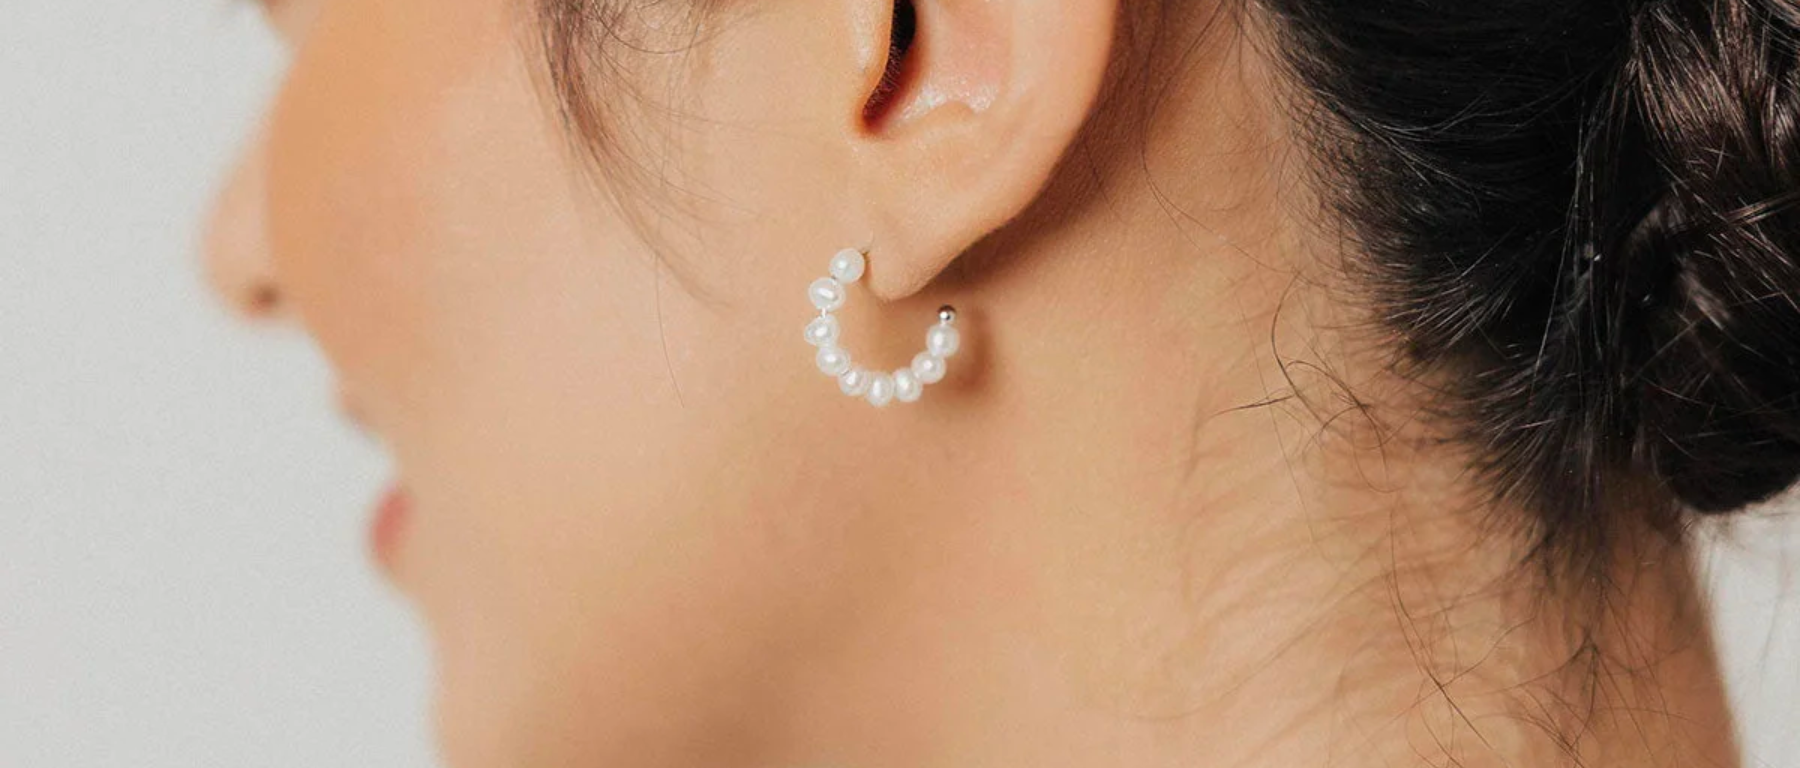 How An Ear Cuff Can Elevate Your Look | PORTER